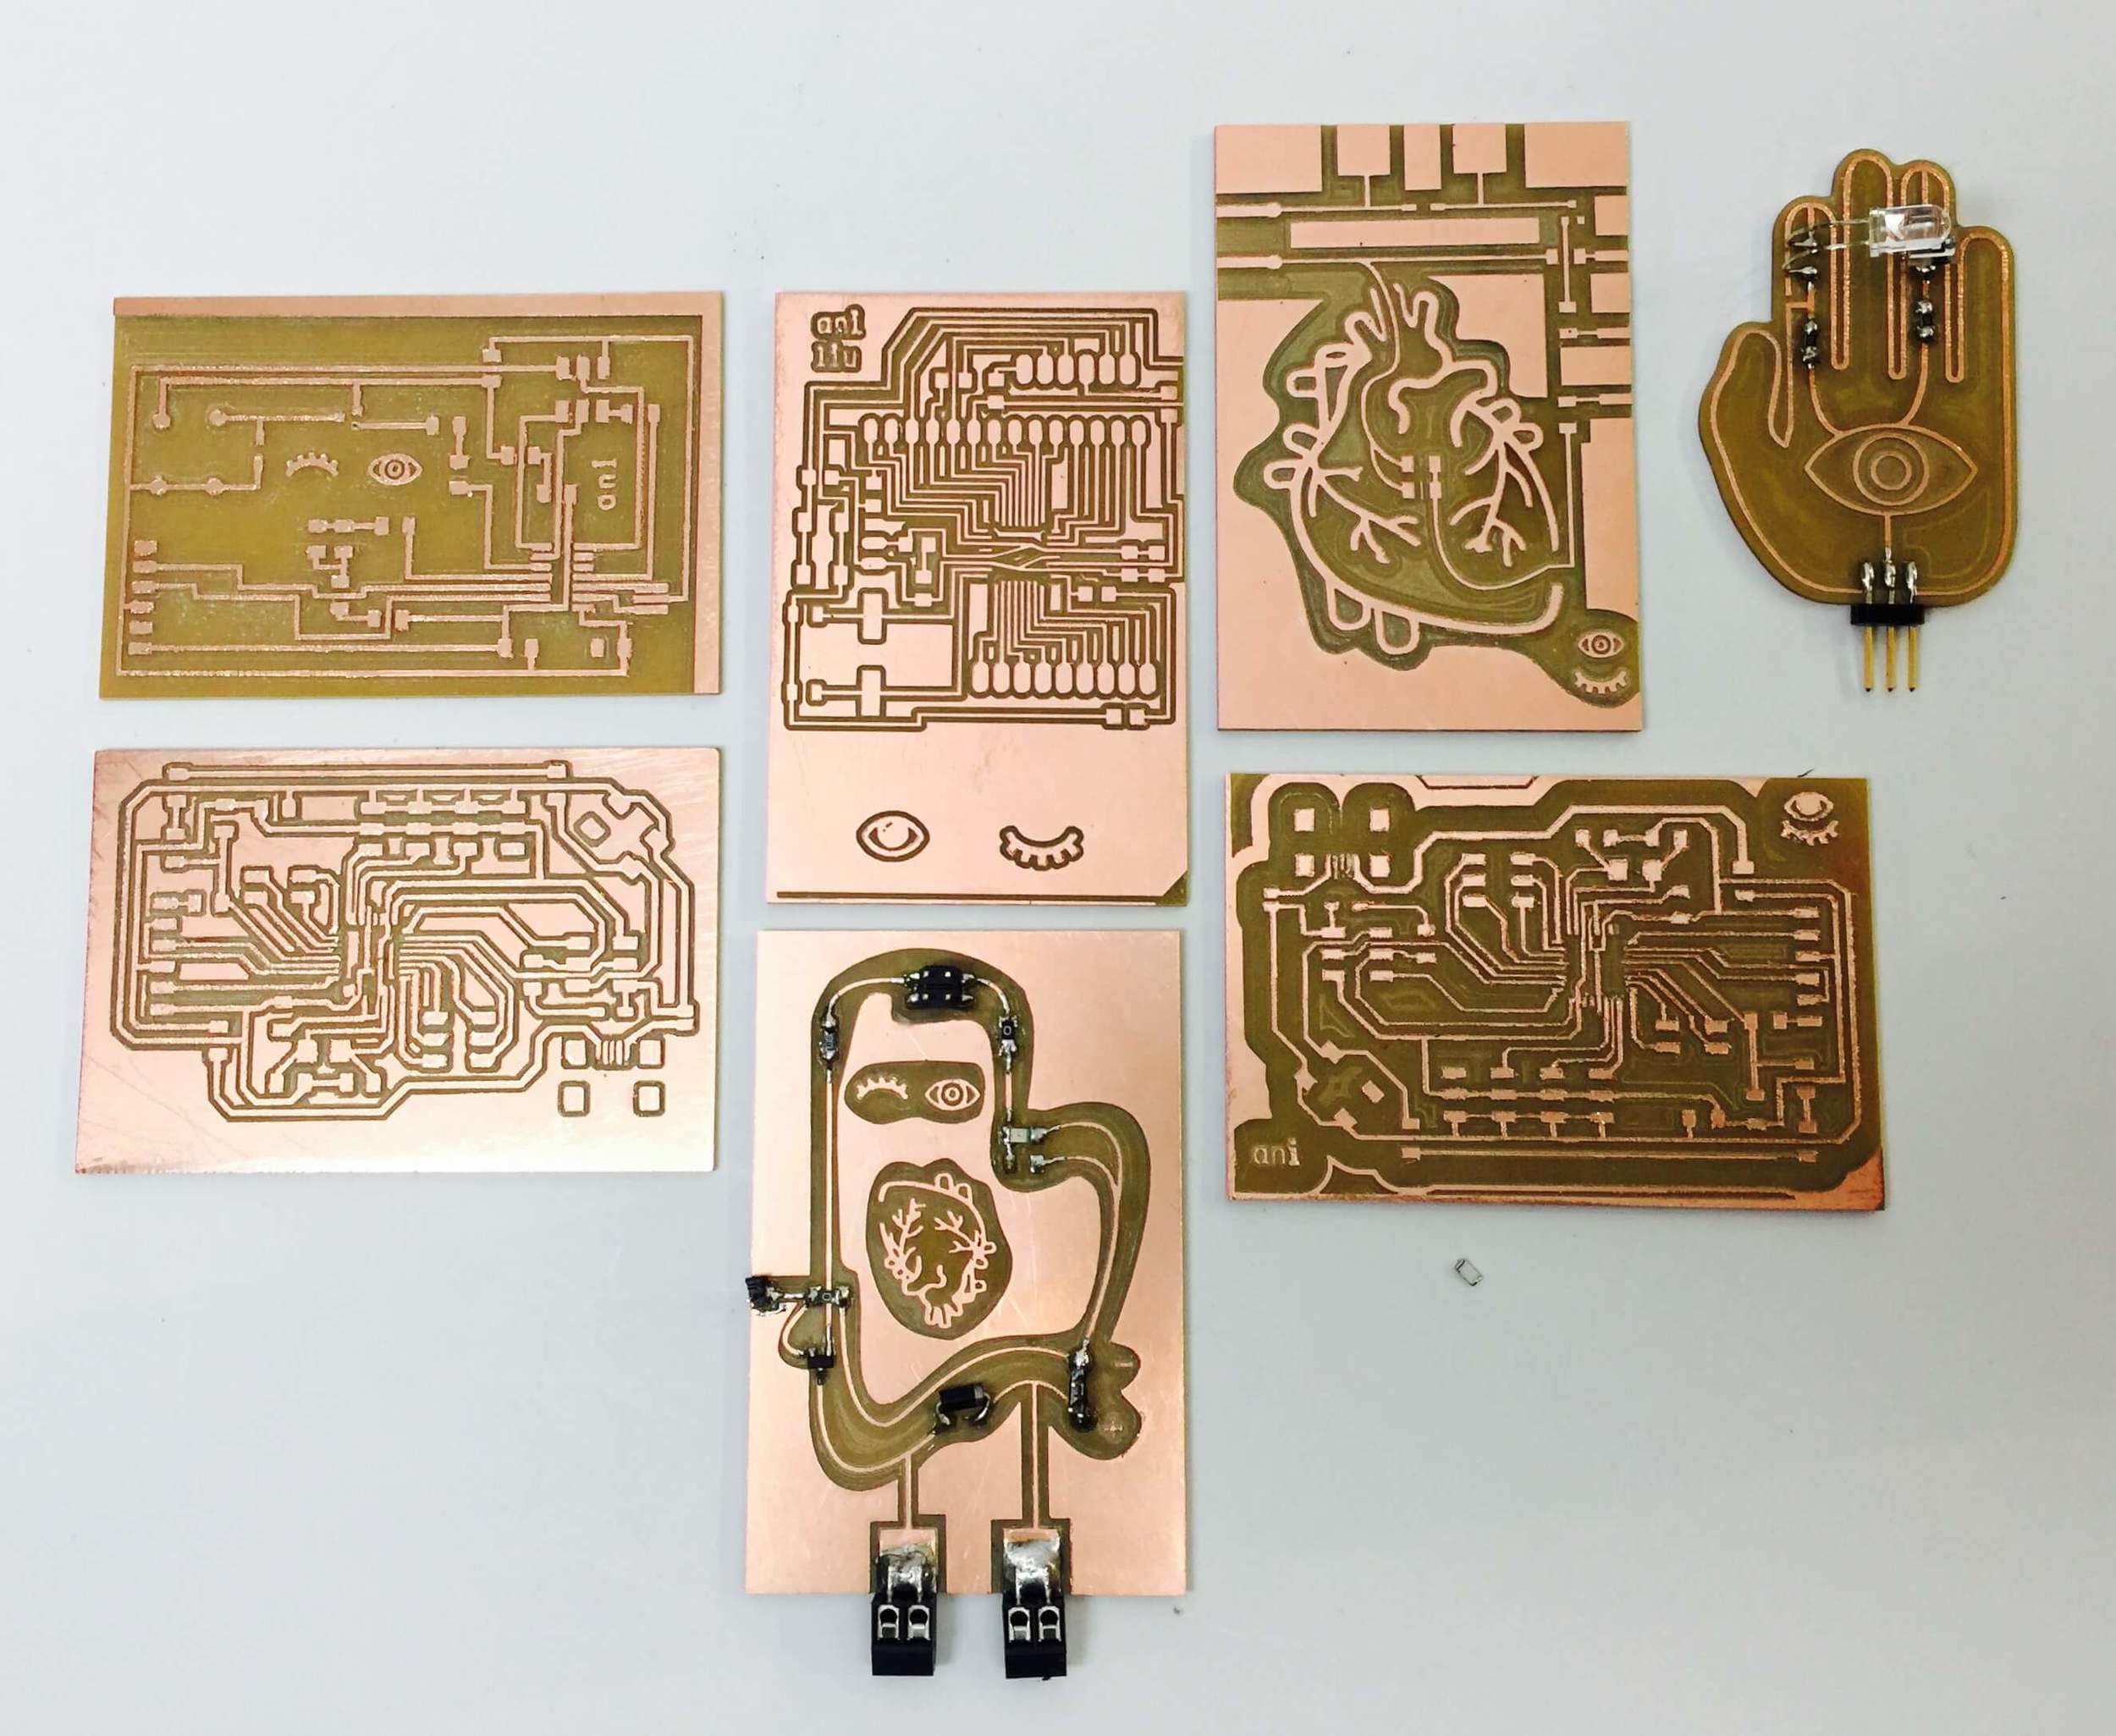  This is a collection of the embedded aesthetic PCBs that I have designed. 